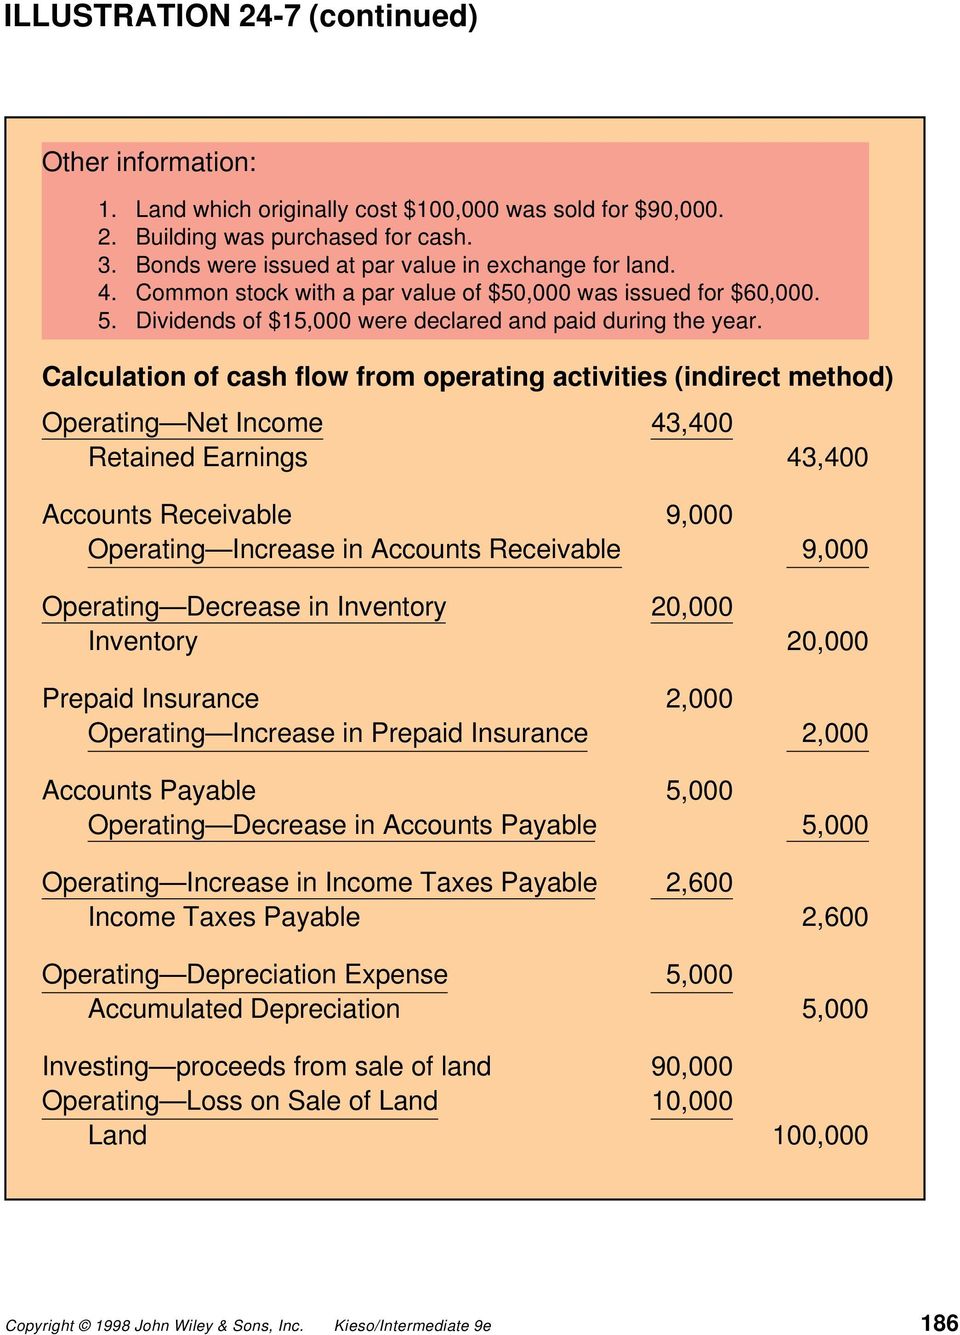 Calculation of cash flow from operating activities (indirect method) Operating Net Income 43,400 Retained Earnings 43,400 Accounts Receivable 9,000 Operating Increase in Accounts Receivable 9,000